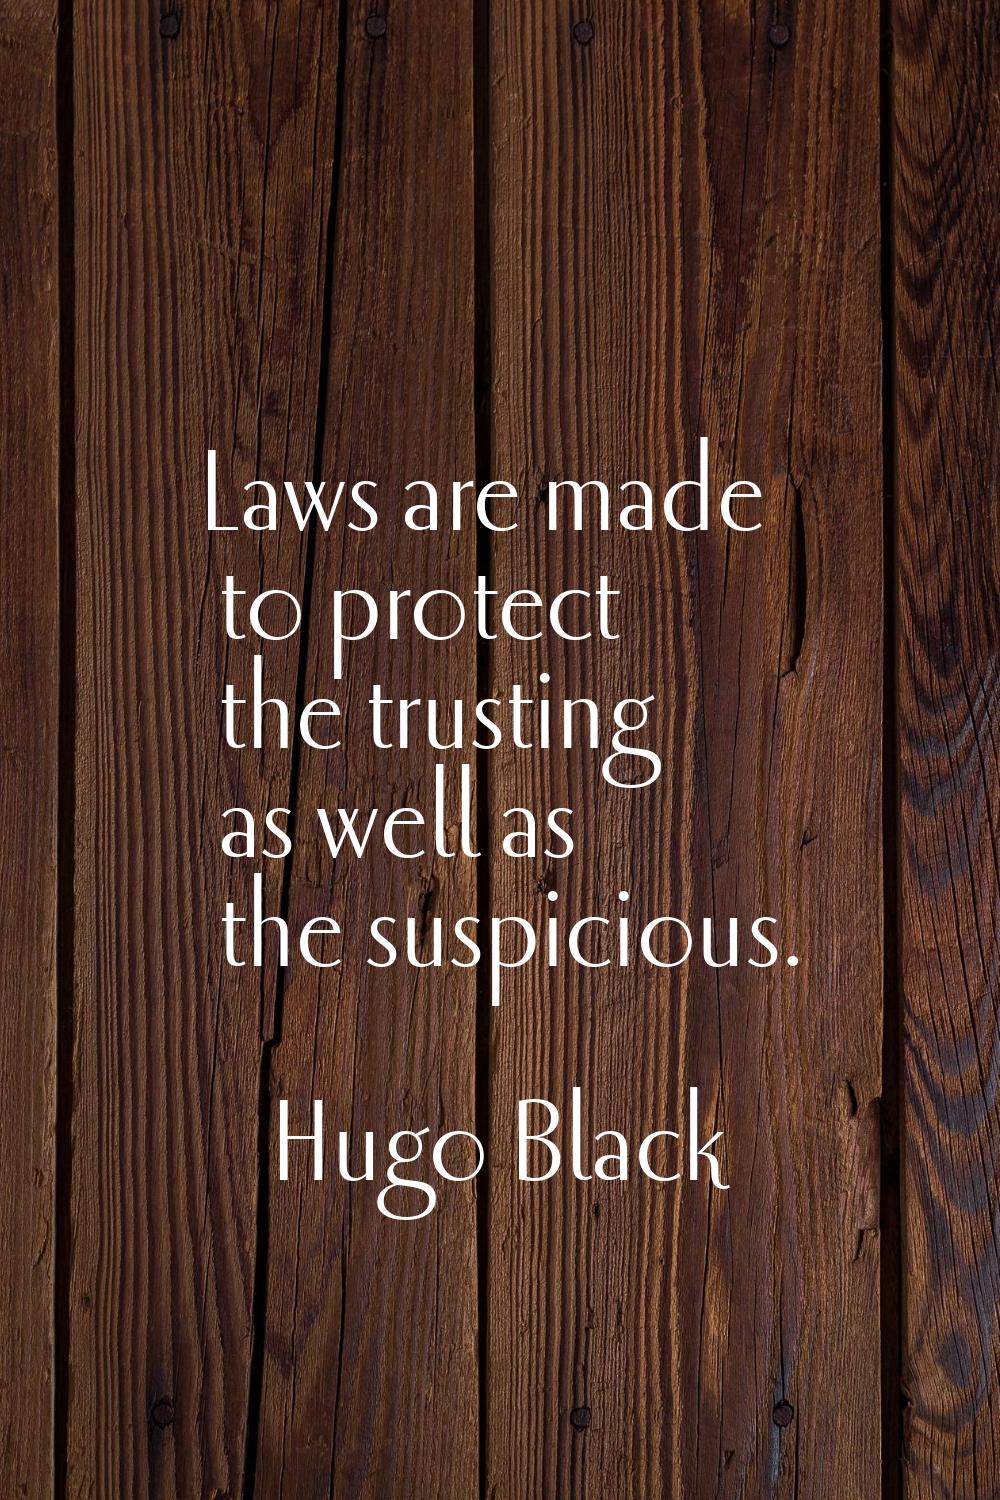 Laws are made to protect the trusting as well as the suspicious.